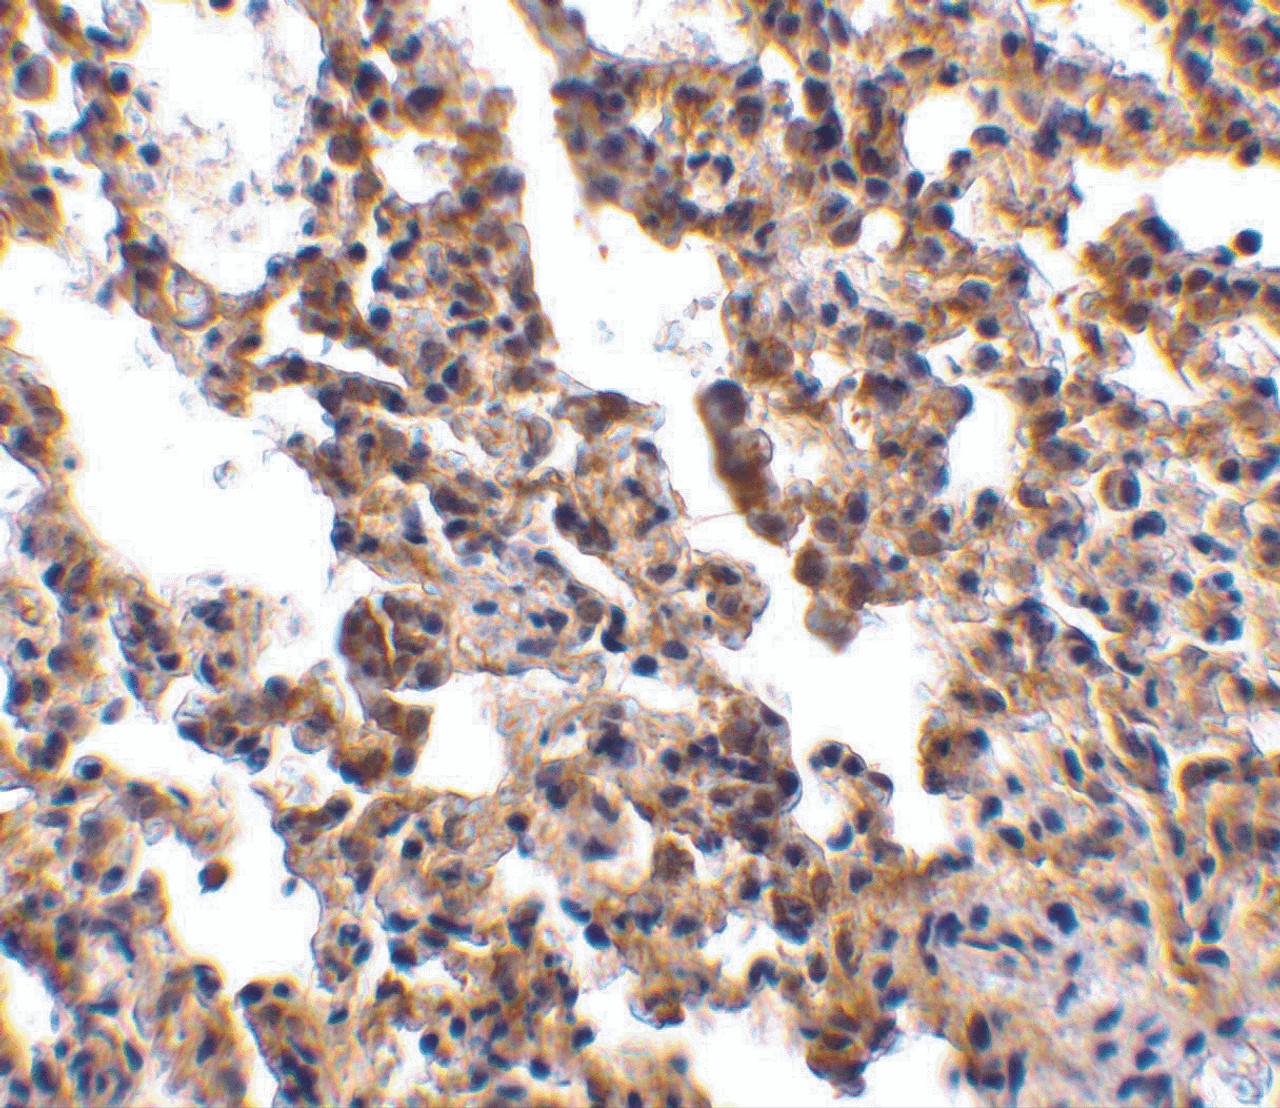 Immunohistochemistry of IL-21 receptor in rat lung with IL-21 receptor antibody at 10 ug/mL.